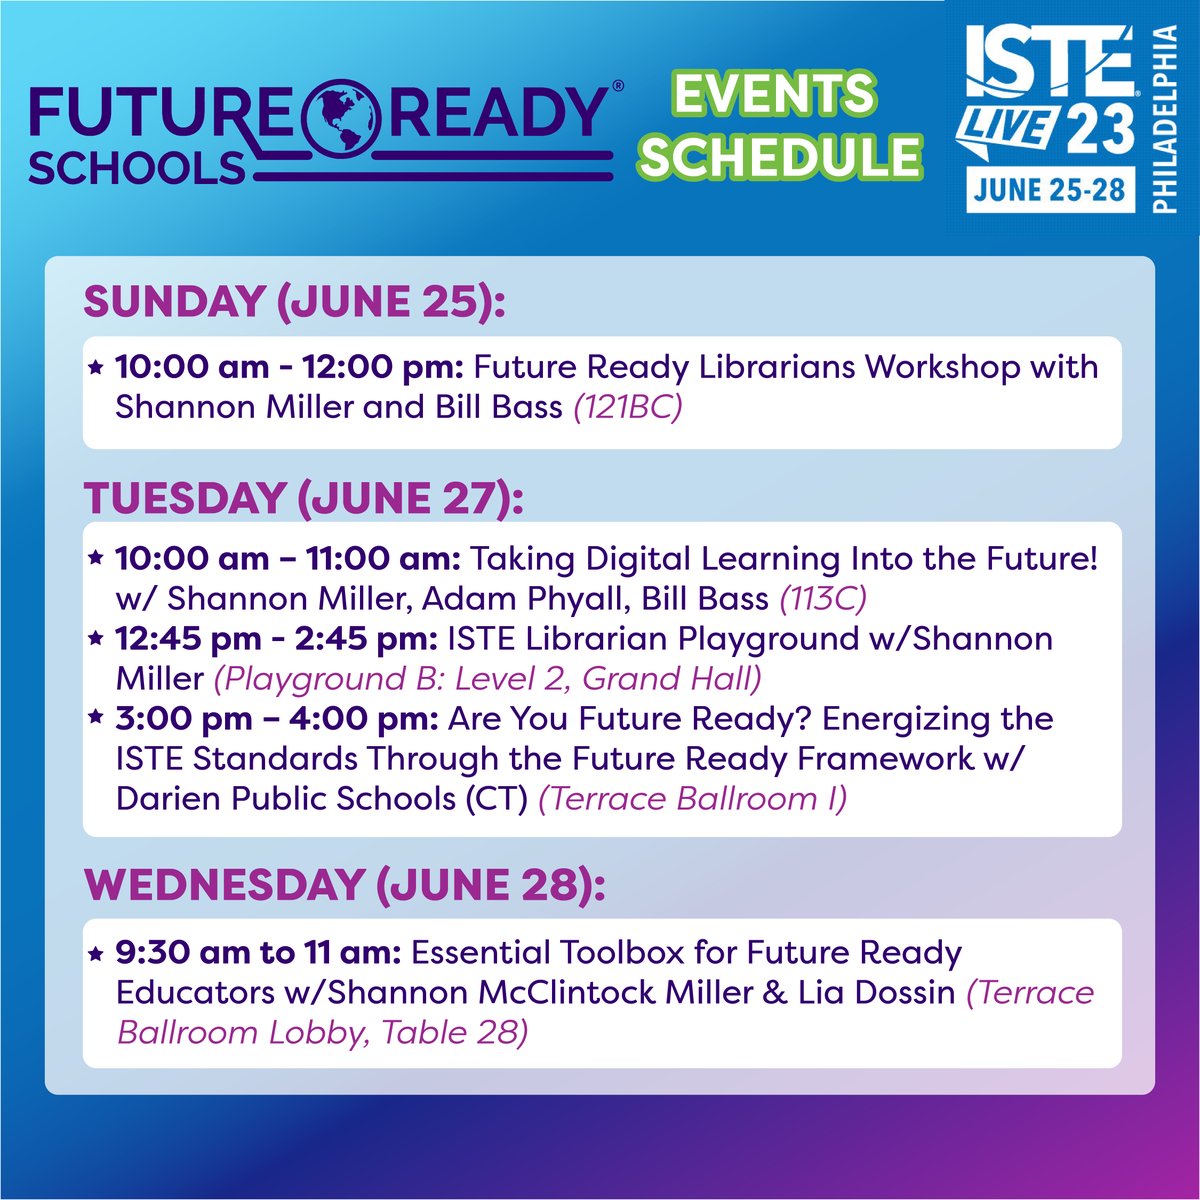 Today we have quite the schedule at #ISTELIVE! 🤩

You didn't hear it from me but... I've been told #FutureReady team has something BIG they're announcing this week at @ISTEofficial!  🤫 

Check out our events schedule to see where you can find us. 👋